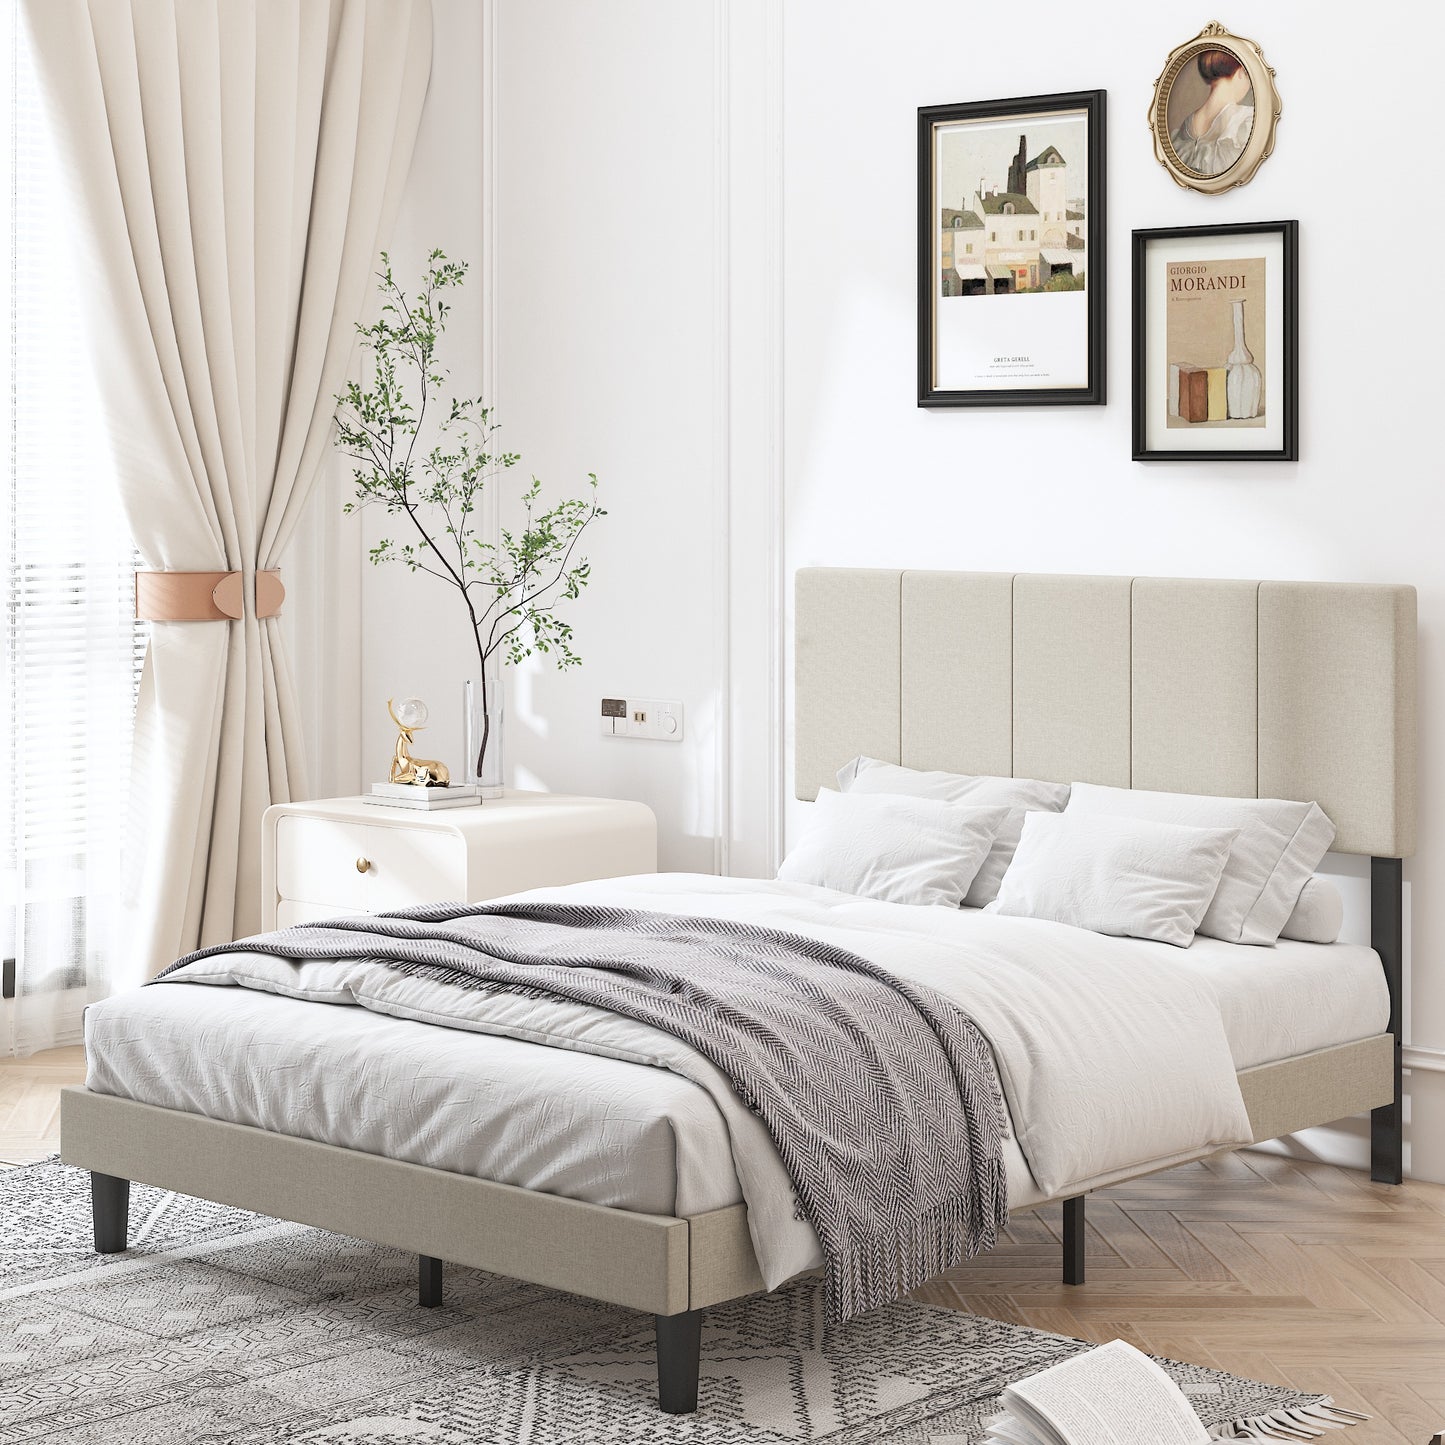 SYNGAR Full Size Platform Bed Frame with Fabric Upholstered Headboard, Sturdy Metal Frame and Strong Wooden Slats, No Box Spring Needed, Beige